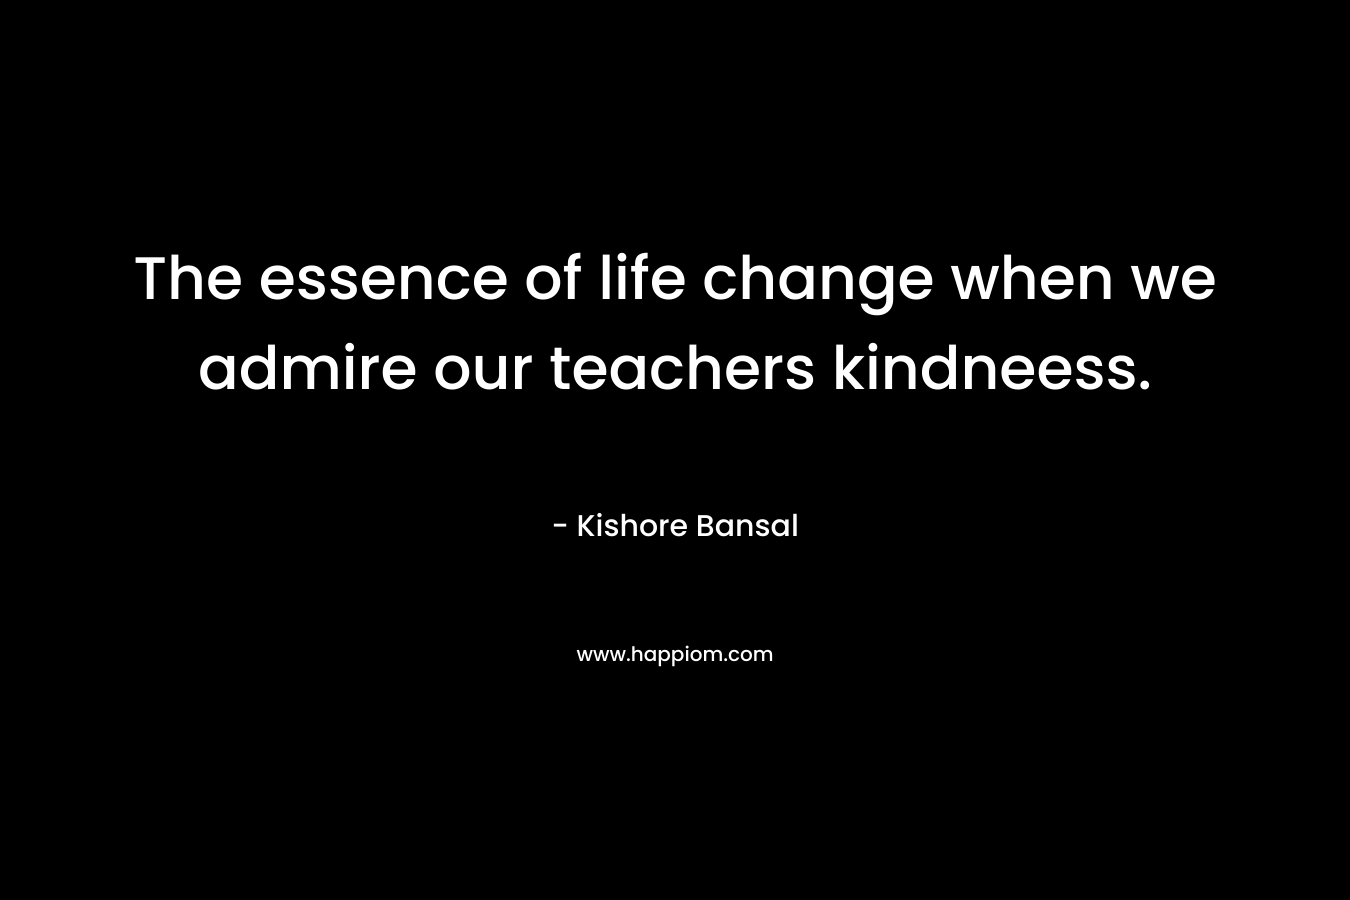 The essence of life change when we admire our teachers kindneess.